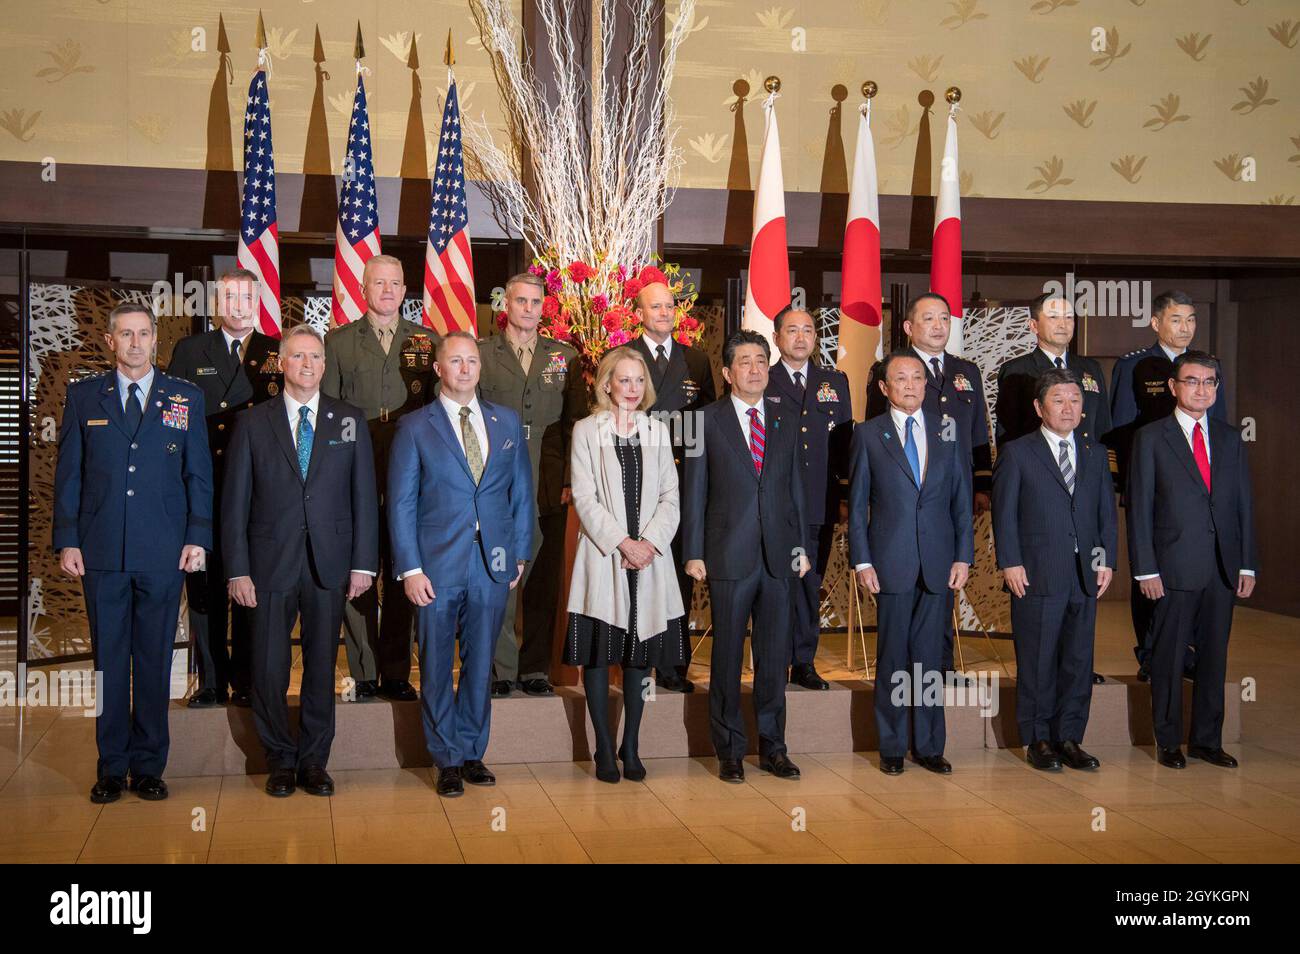 TOKYO, Japan – Japanese Prime Minister Shinzo Abe, center right, stands alongside Mary Jean Eisenhower, center left, and senior official and military leaders of U.S. and Japan at a reception ceremony commemorating the 60th anniversary of the U.S-Japan Treaty of Mutual Cooperation and Security. The treaty was signed by the governments of then U.S. President Dwight D. Eisenhower, grandfather to Mary Jean Eisenhower, and then Japanese Prime Minister Nobusuke Kishi, grandfather of current Prime Minister Shinzo Abe. (U.S. Navy photo by Mass Communication Specialist 2nd Class Jeanette Mullinax) Stock Photo